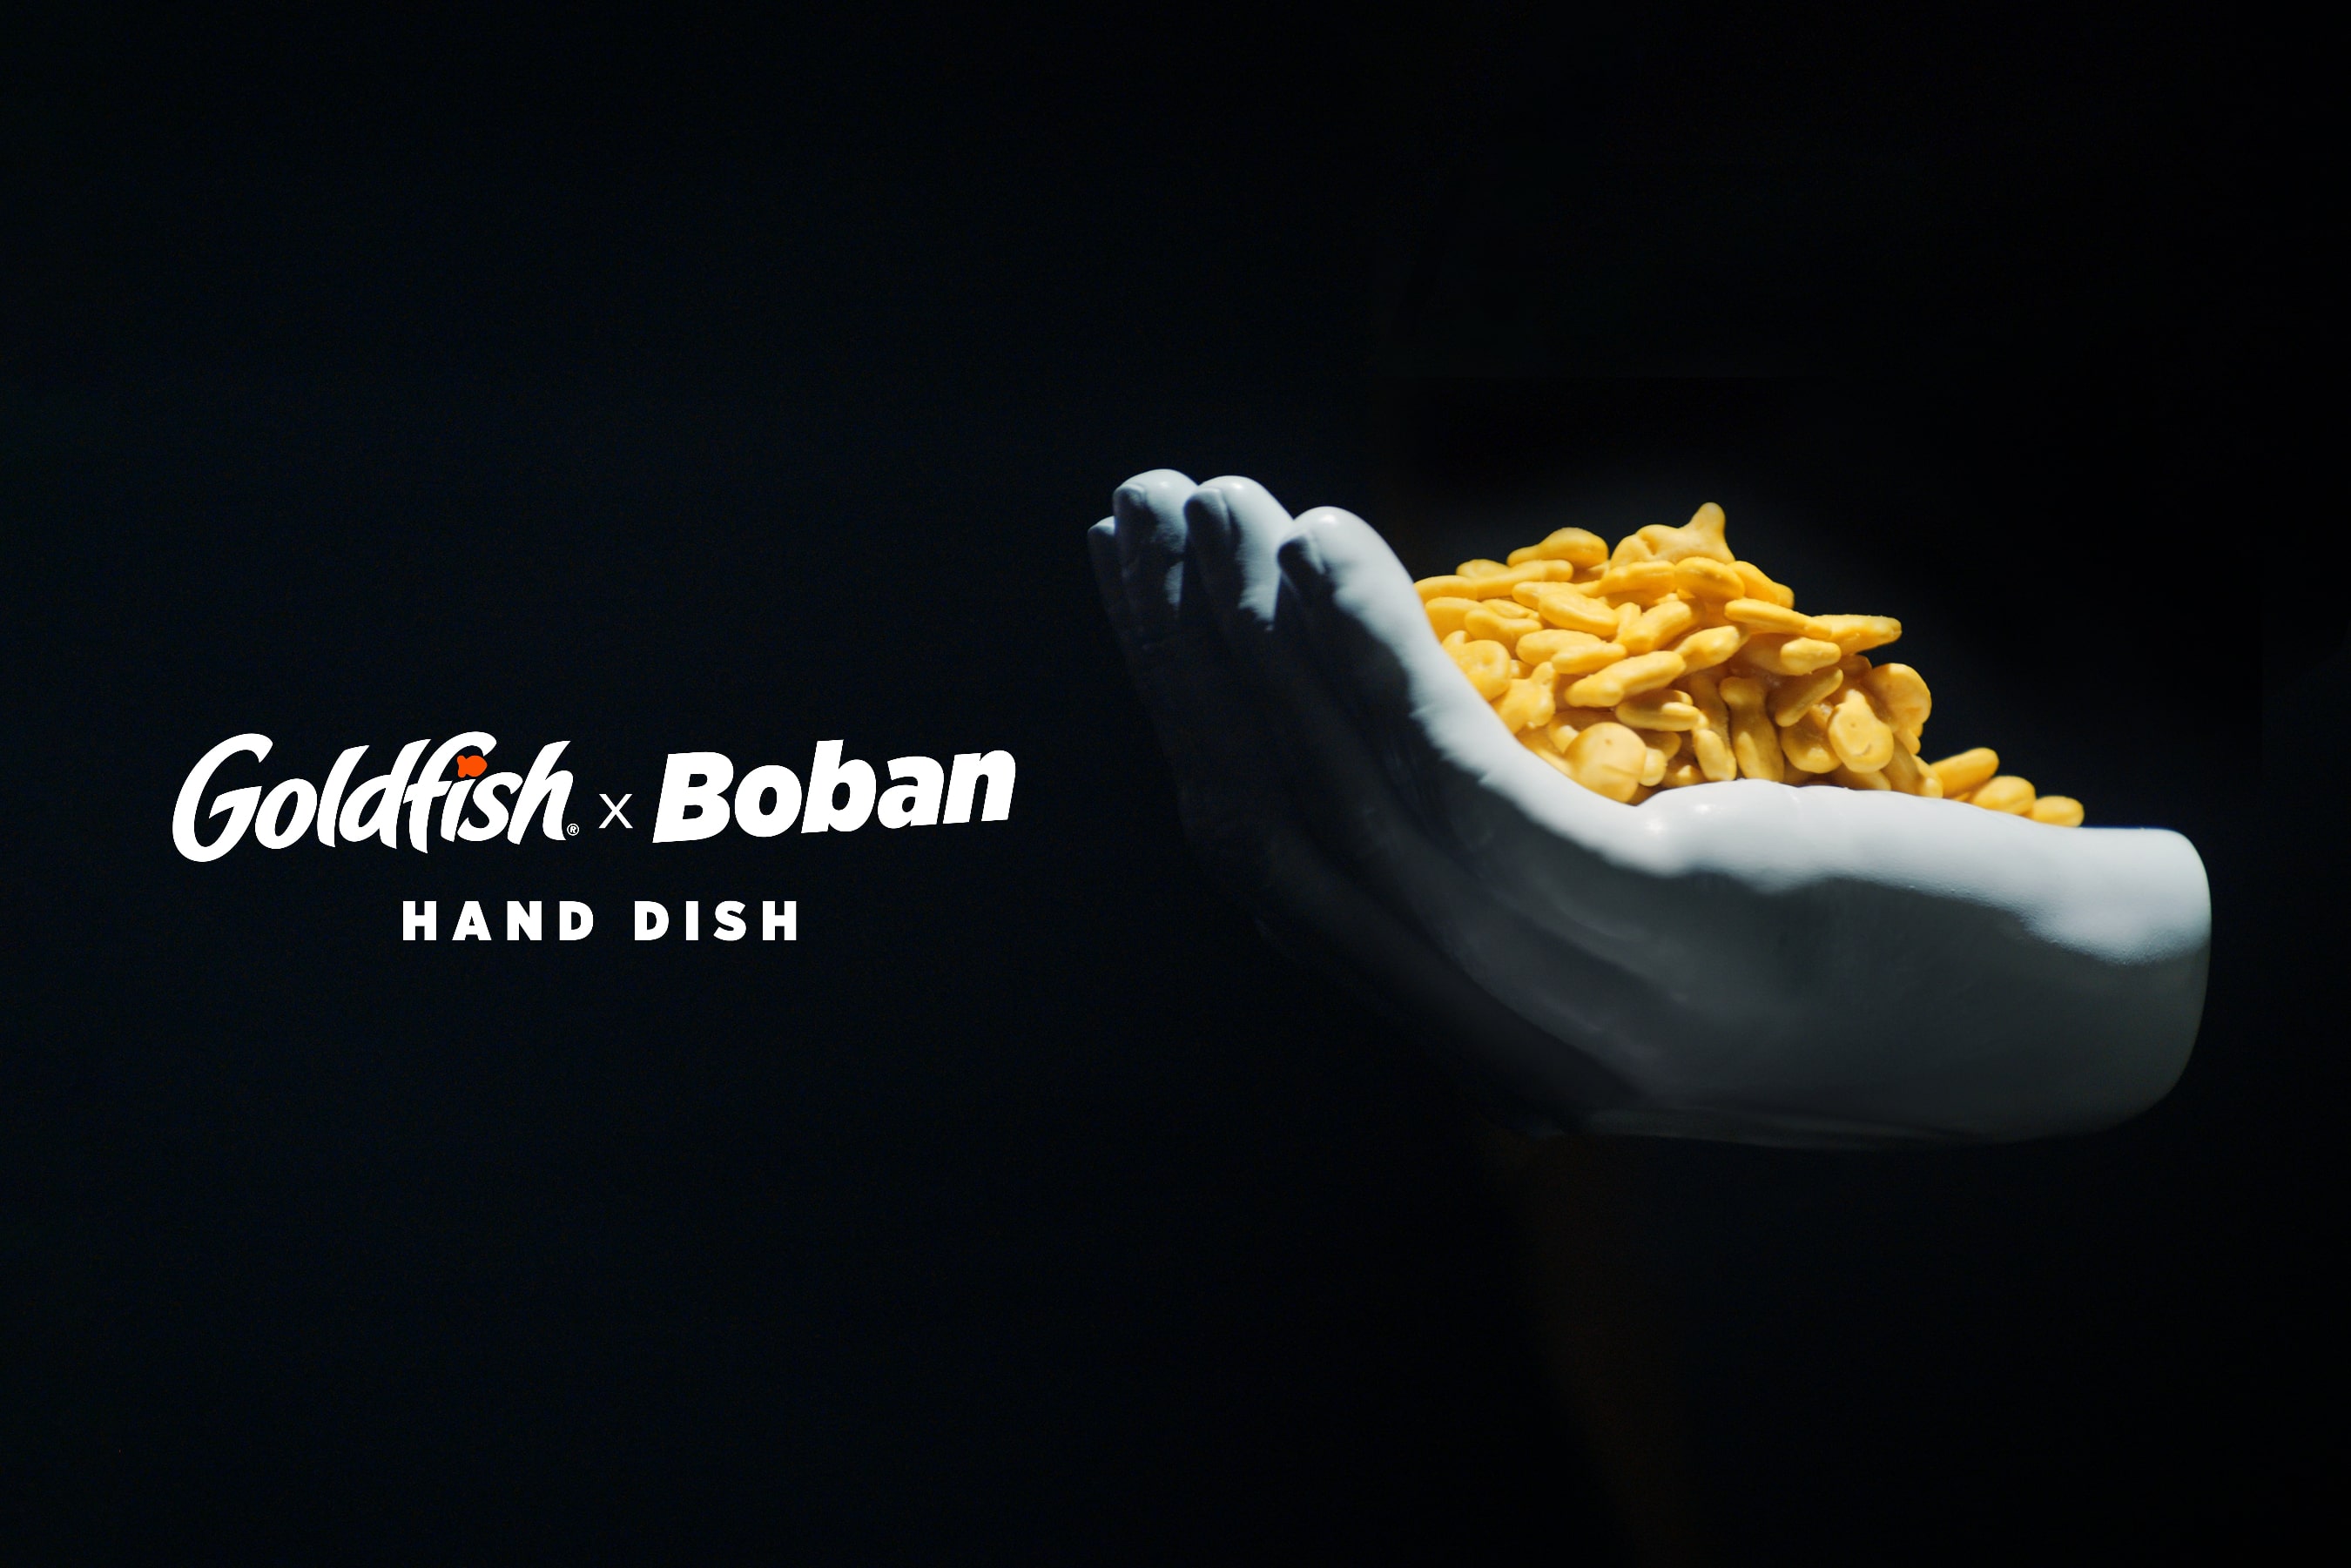 Fitting 301 Goldfish crackers and measuring at 10.75 inches, the limited-edition Goldfish x Boban Hand Dish will be available exclusively on March 1. The Goldfish x Boban Hand Dish drops on 03/01 at 3:01 PM ET and will be available for a limited time.